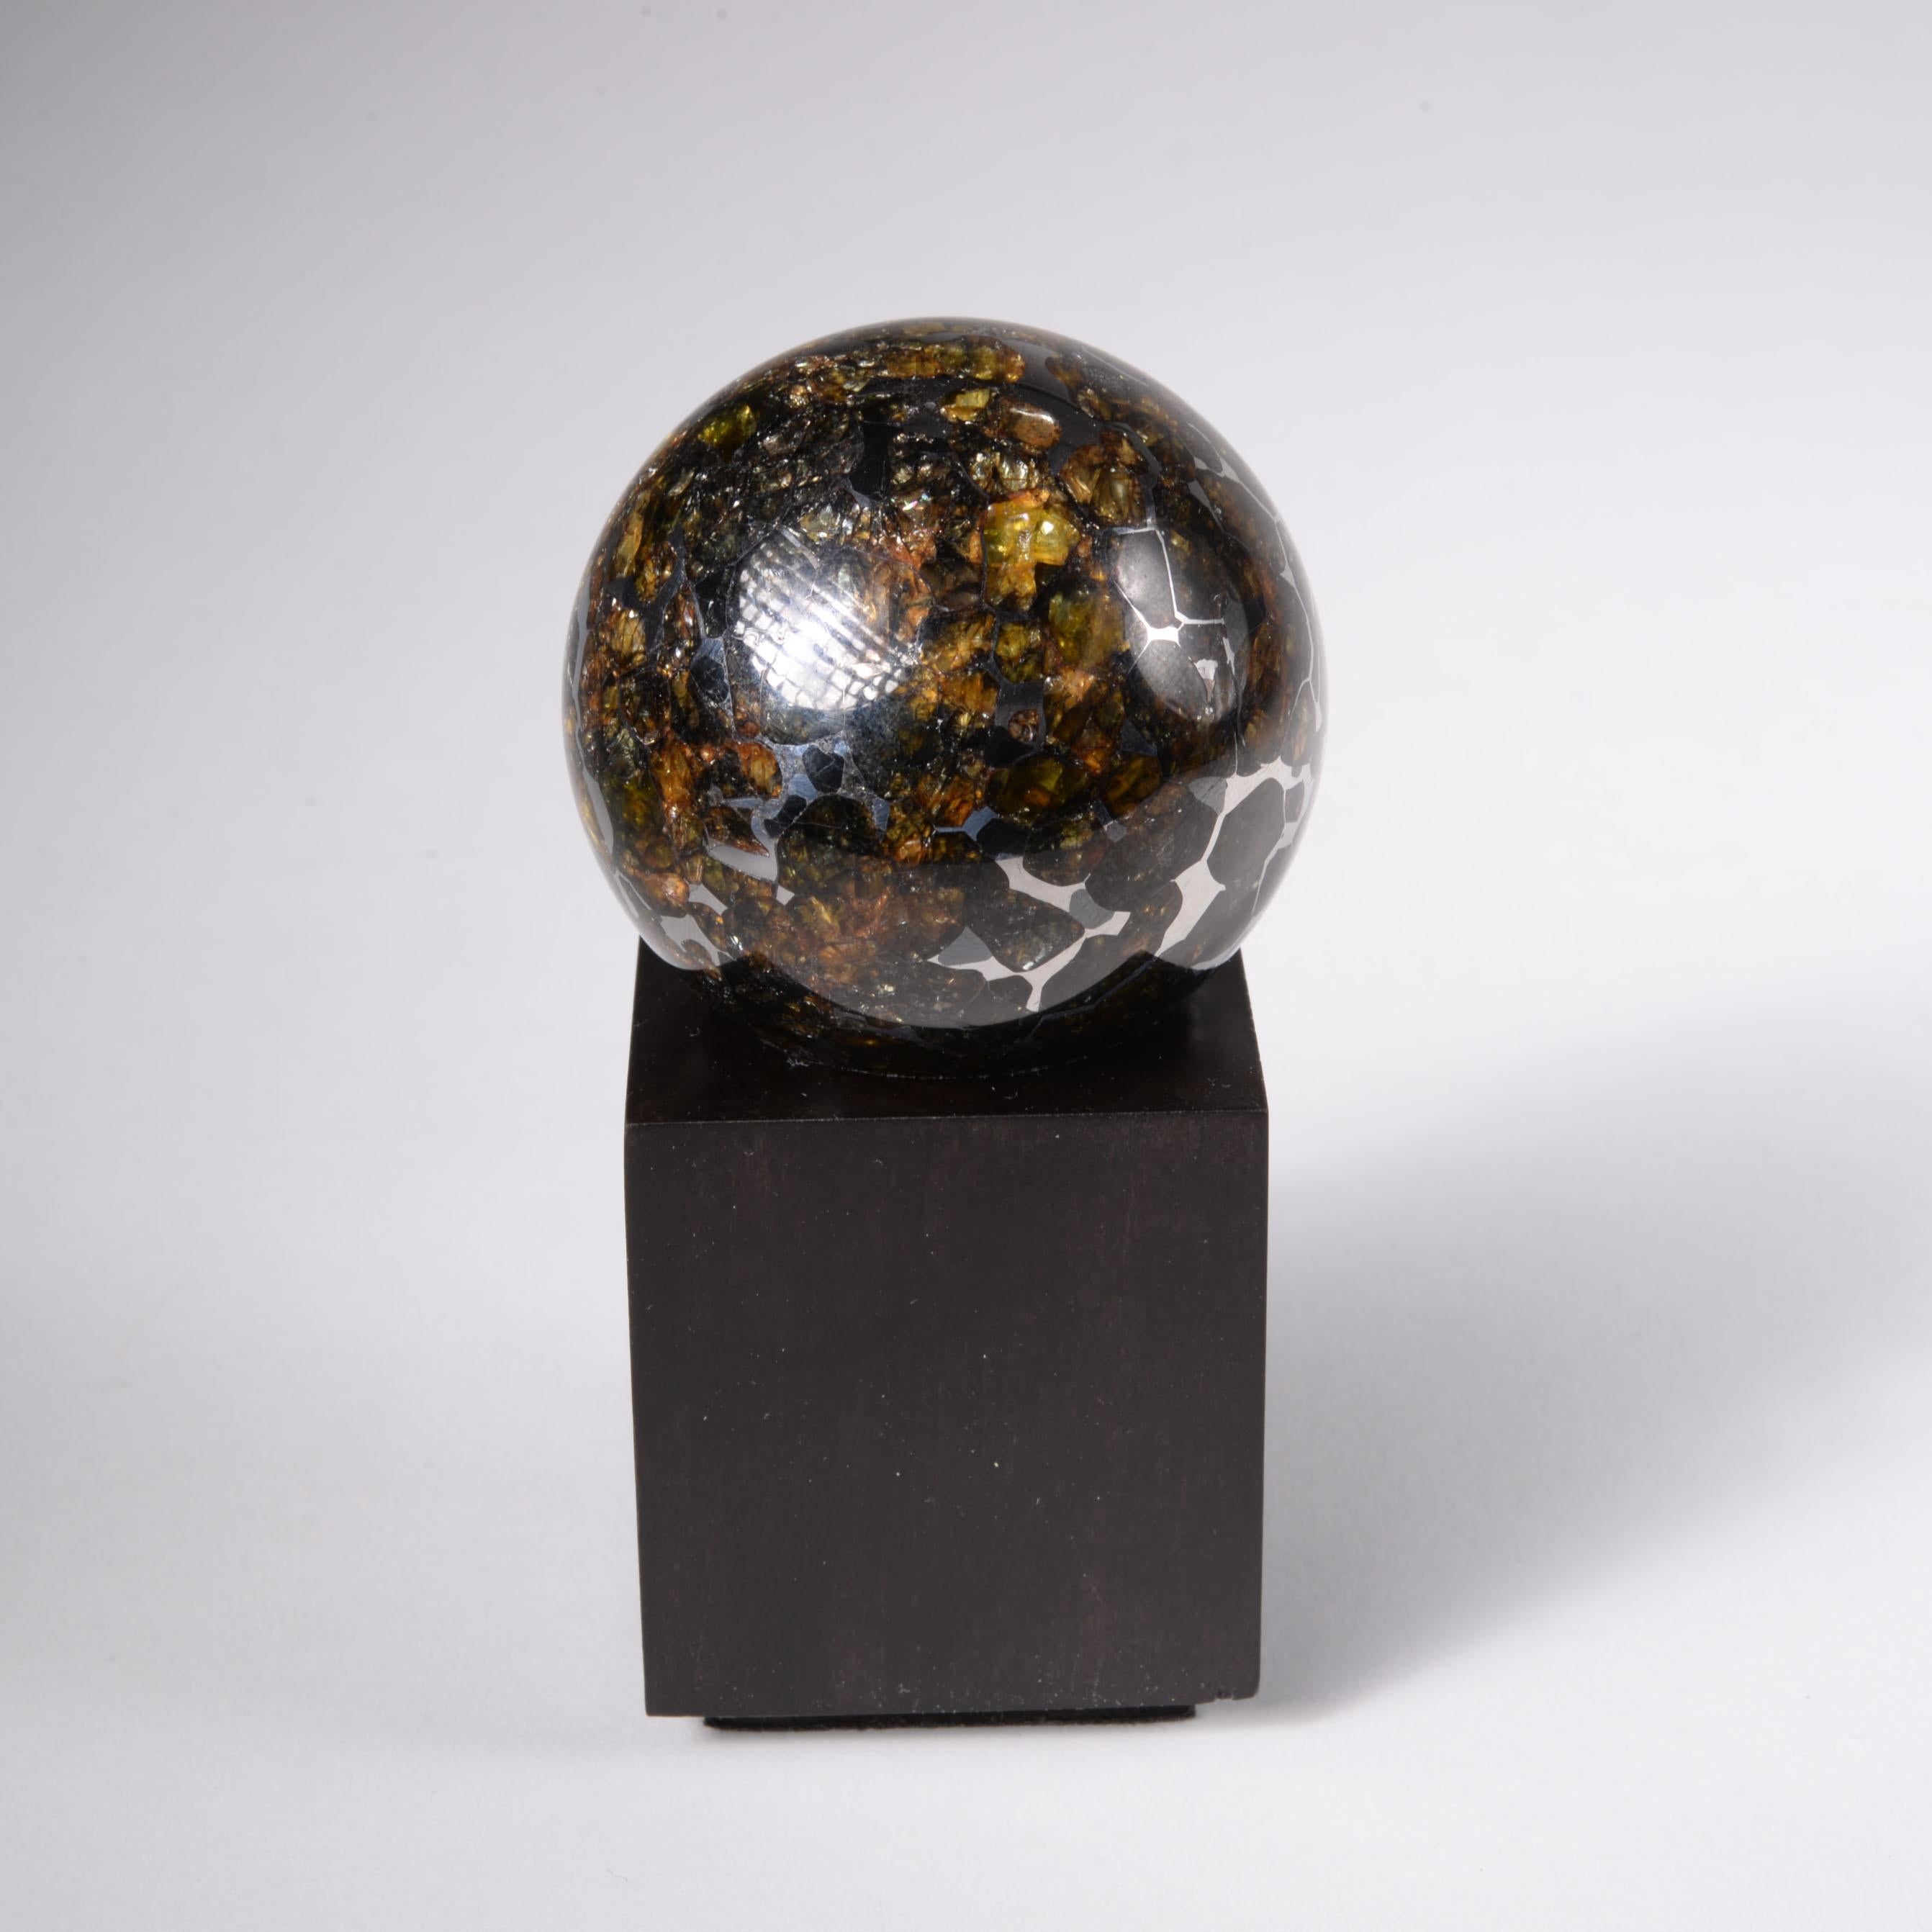 Seymchan Sphere
Pallasite
291 g 

Comprising less than 0.2% of all meteorites, pallasites, made up of an iron-nickel matrix interwoven with amber-coloured olivine gemstones, are the most dazzling meteorites of all. This piece, extracted from the